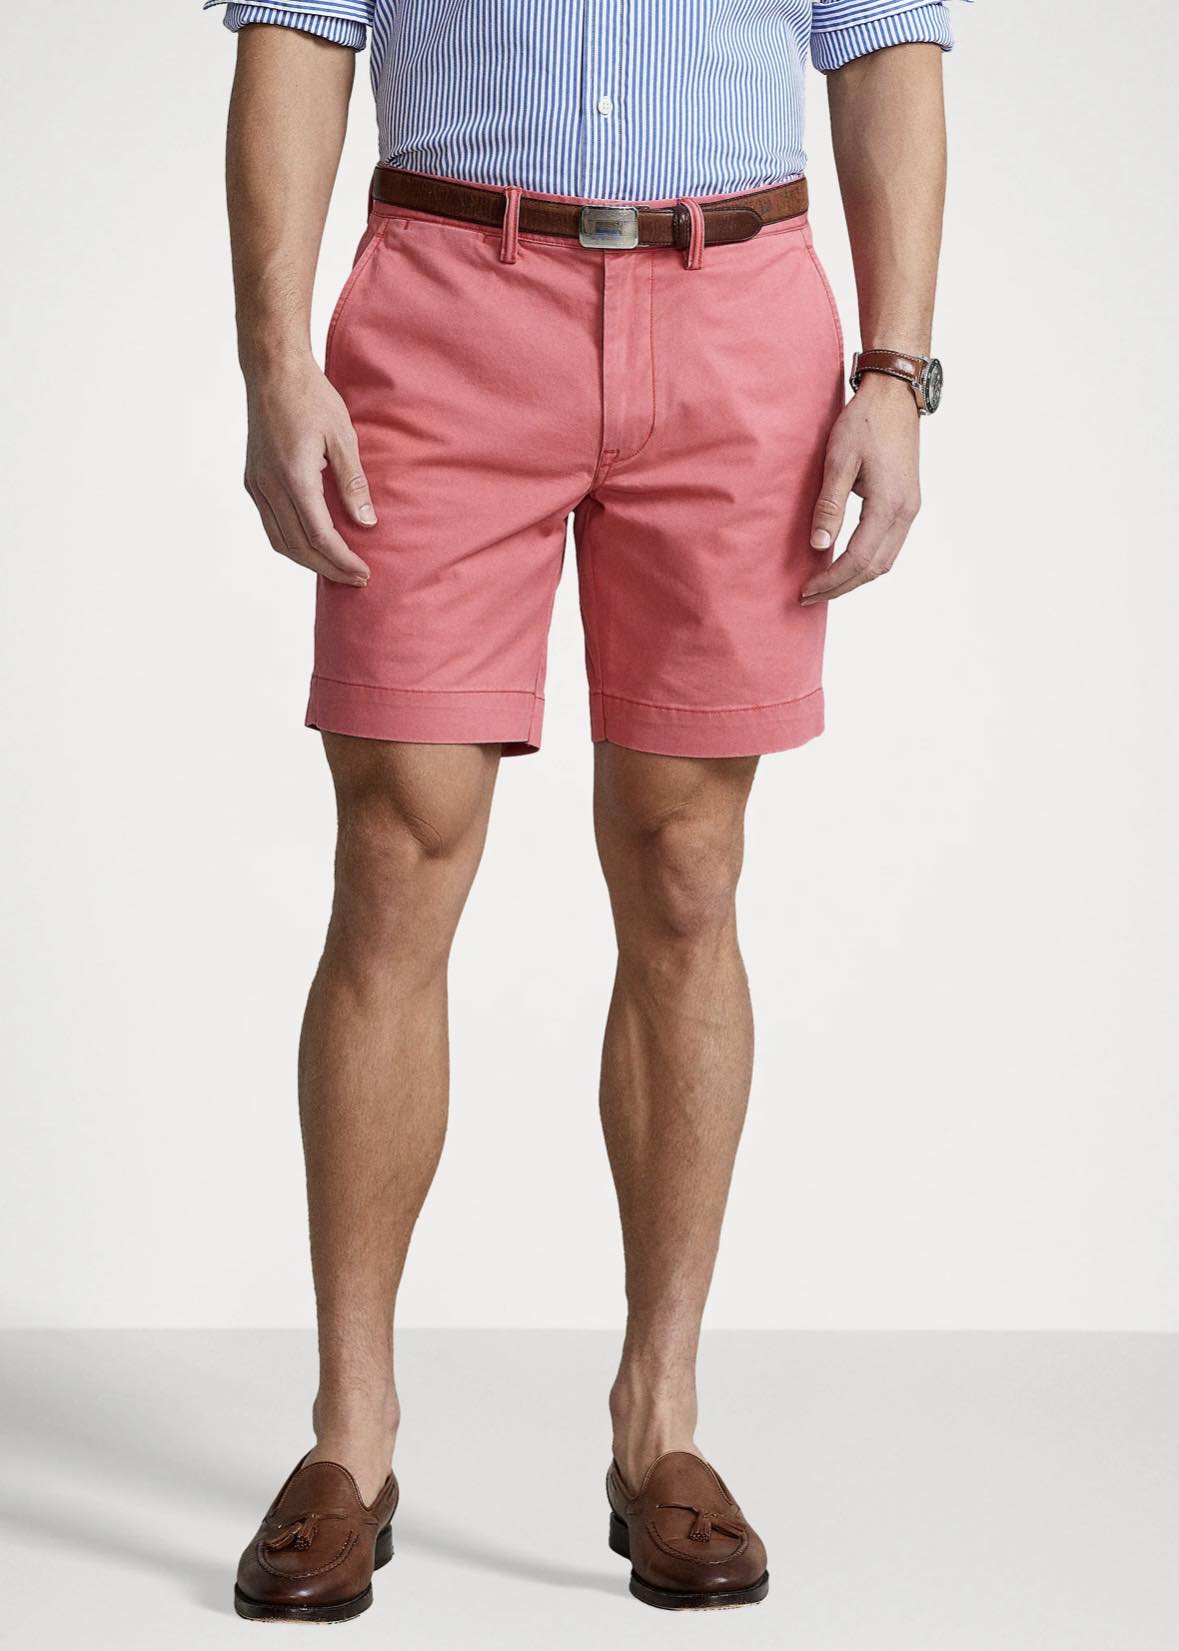 Polo Ralph Lauren Stretch Straight Fit shorts - Nantucket Red